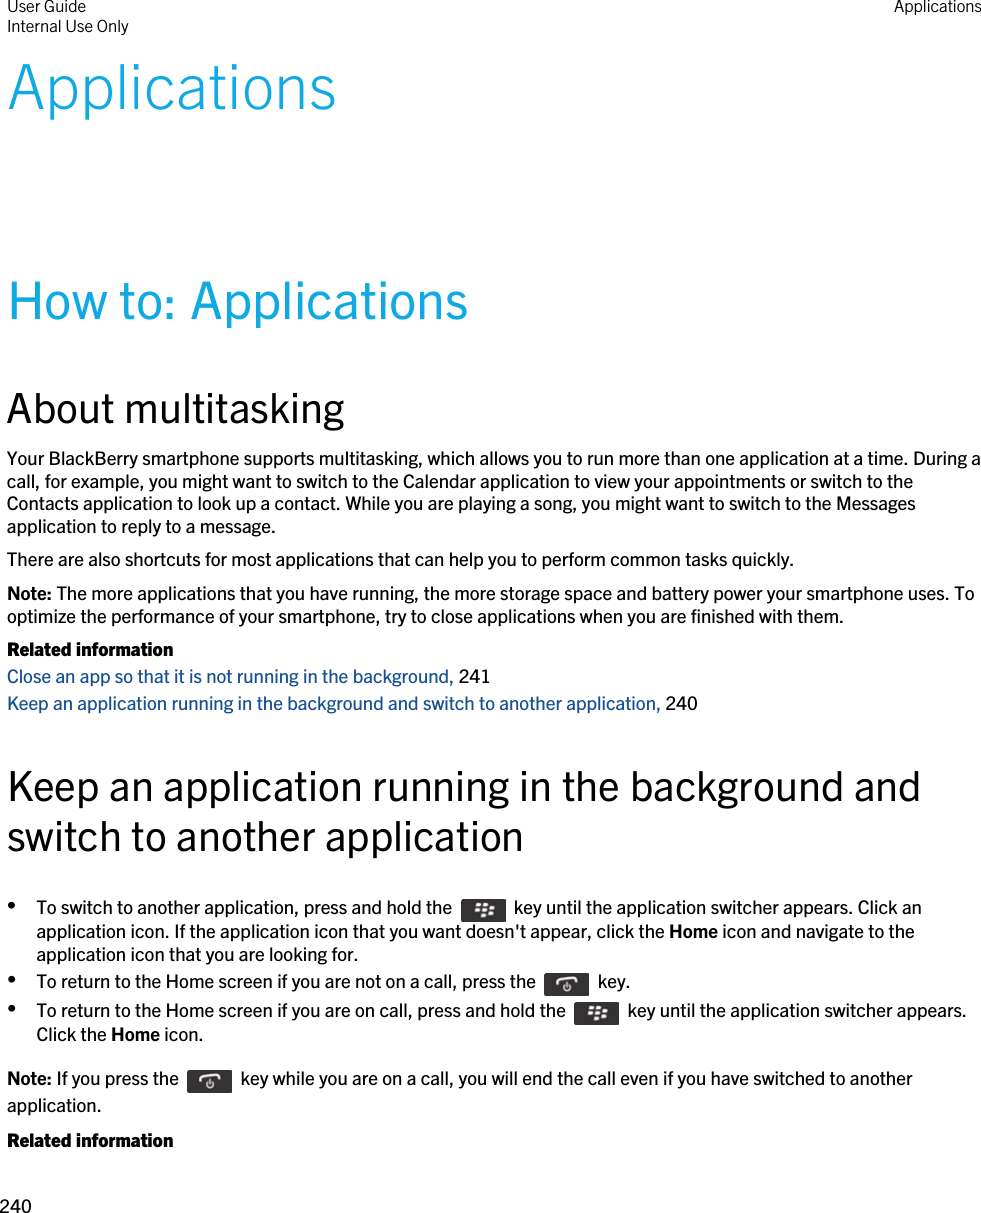 ApplicationsHow to: ApplicationsAbout multitaskingYour BlackBerry smartphone supports multitasking, which allows you to run more than one application at a time. During a call, for example, you might want to switch to the Calendar application to view your appointments or switch to the Contacts application to look up a contact. While you are playing a song, you might want to switch to the Messages application to reply to a message.There are also shortcuts for most applications that can help you to perform common tasks quickly.Note: The more applications that you have running, the more storage space and battery power your smartphone uses. To optimize the performance of your smartphone, try to close applications when you are finished with them.Related informationClose an app so that it is not running in the background, 241Keep an application running in the background and switch to another application, 240Keep an application running in the background and switch to another application•To switch to another application, press and hold the    key until the application switcher appears. Click an application icon. If the application icon that you want doesn&apos;t appear, click the Home icon and navigate to the application icon that you are looking for.•To return to the Home screen if you are not on a call, press the    key. •To return to the Home screen if you are on call, press and hold the    key until the application switcher appears. Click the Home icon.Note: If you press the    key while you are on a call, you will end the call even if you have switched to another application.Related informationUser GuideInternal Use Only Applications240 